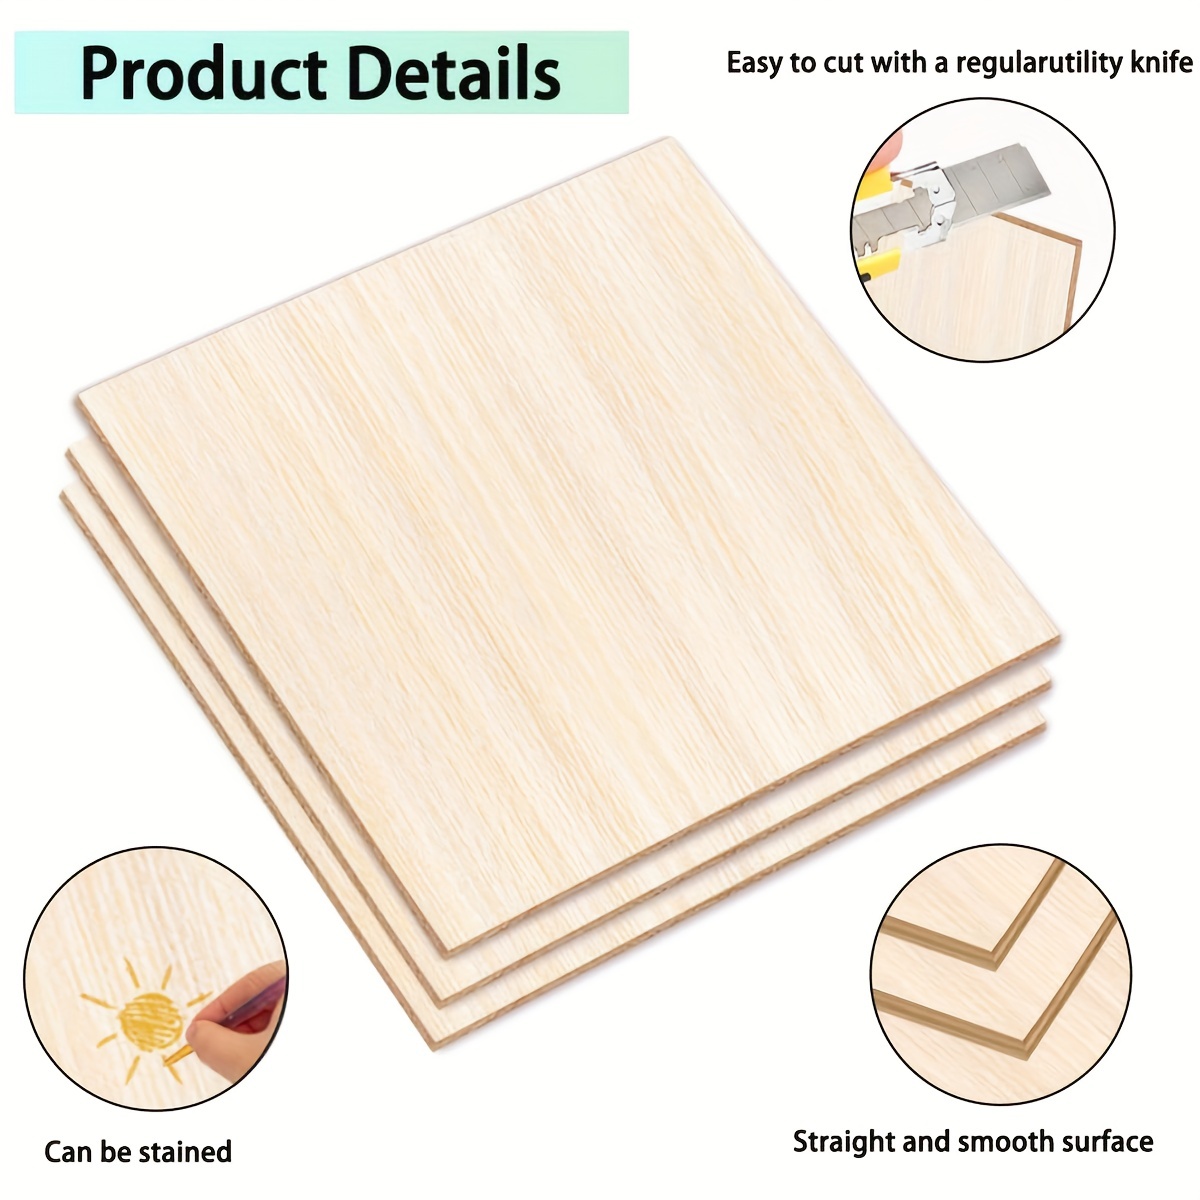 Wood Sheets Craft Basswood Board Unfinished Plank Plywood Thin